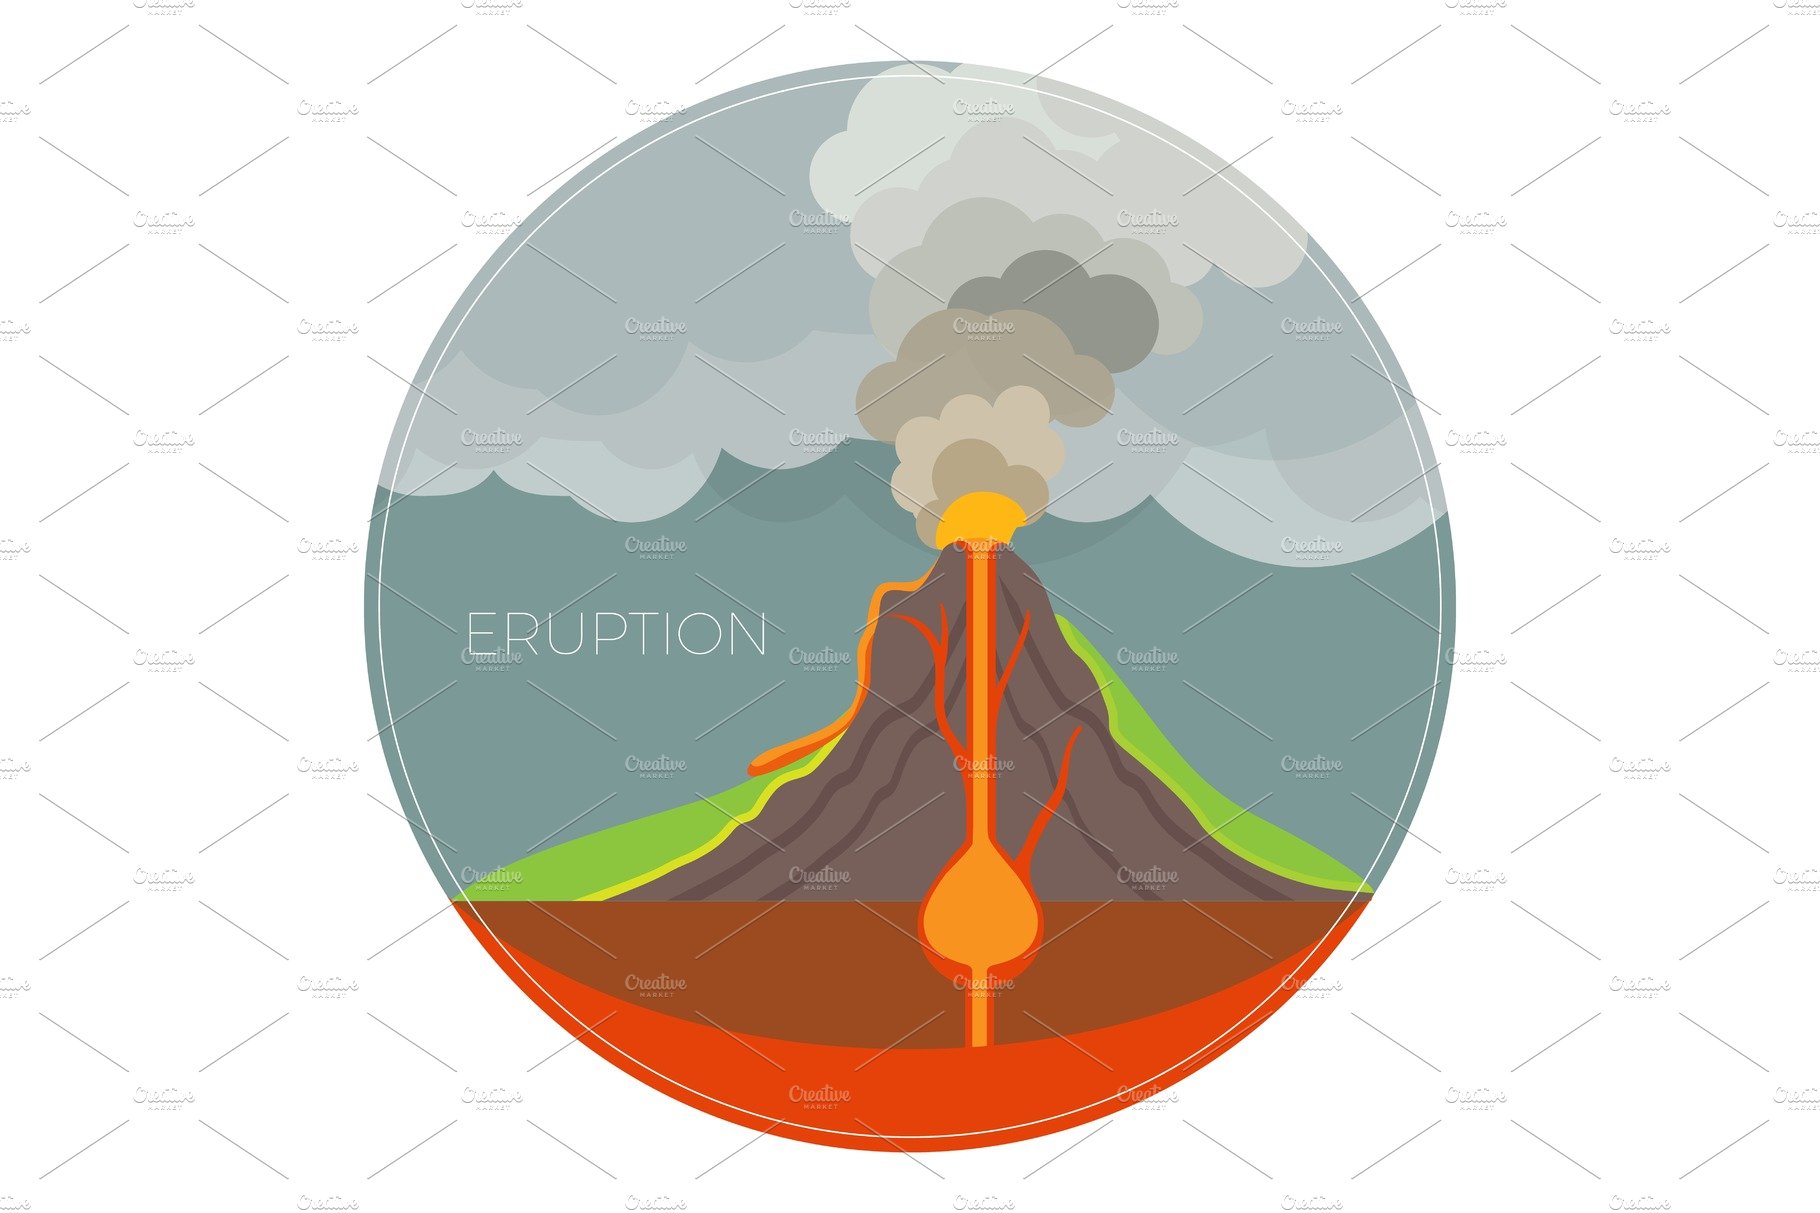 Dangerous volcano eruption scheme with lot of smoke cover image.